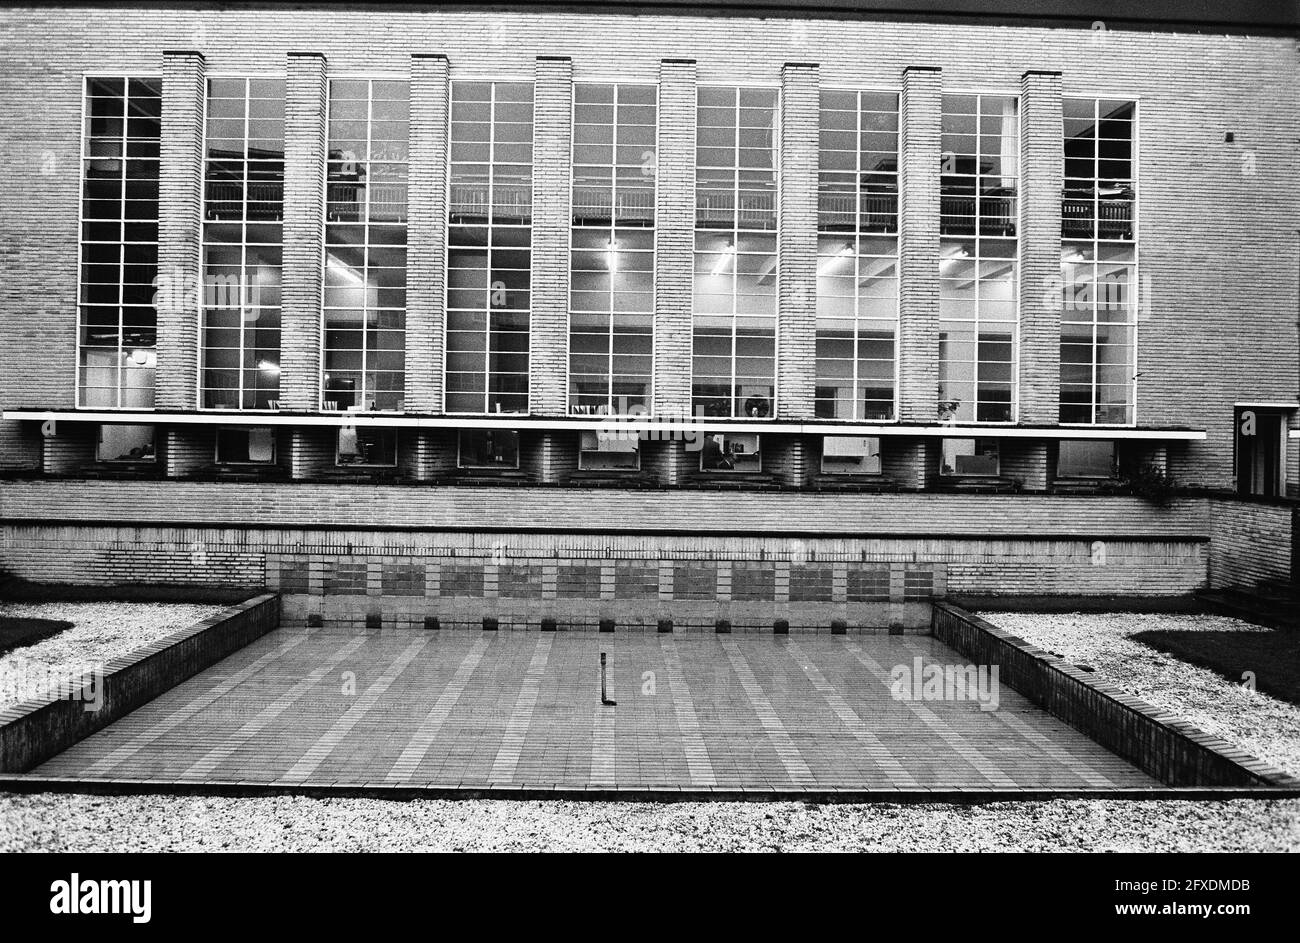 Town Hall in Hilversum by architect W.M. Dudok, interior, December 6, 1974, architecture, buildings, council chambers, town halls, The Netherlands, 20th century press agency photo, news to remember, documentary, historic photography 1945-1990, visual stories, human history of the Twentieth Century, capturing moments in time Stock Photo